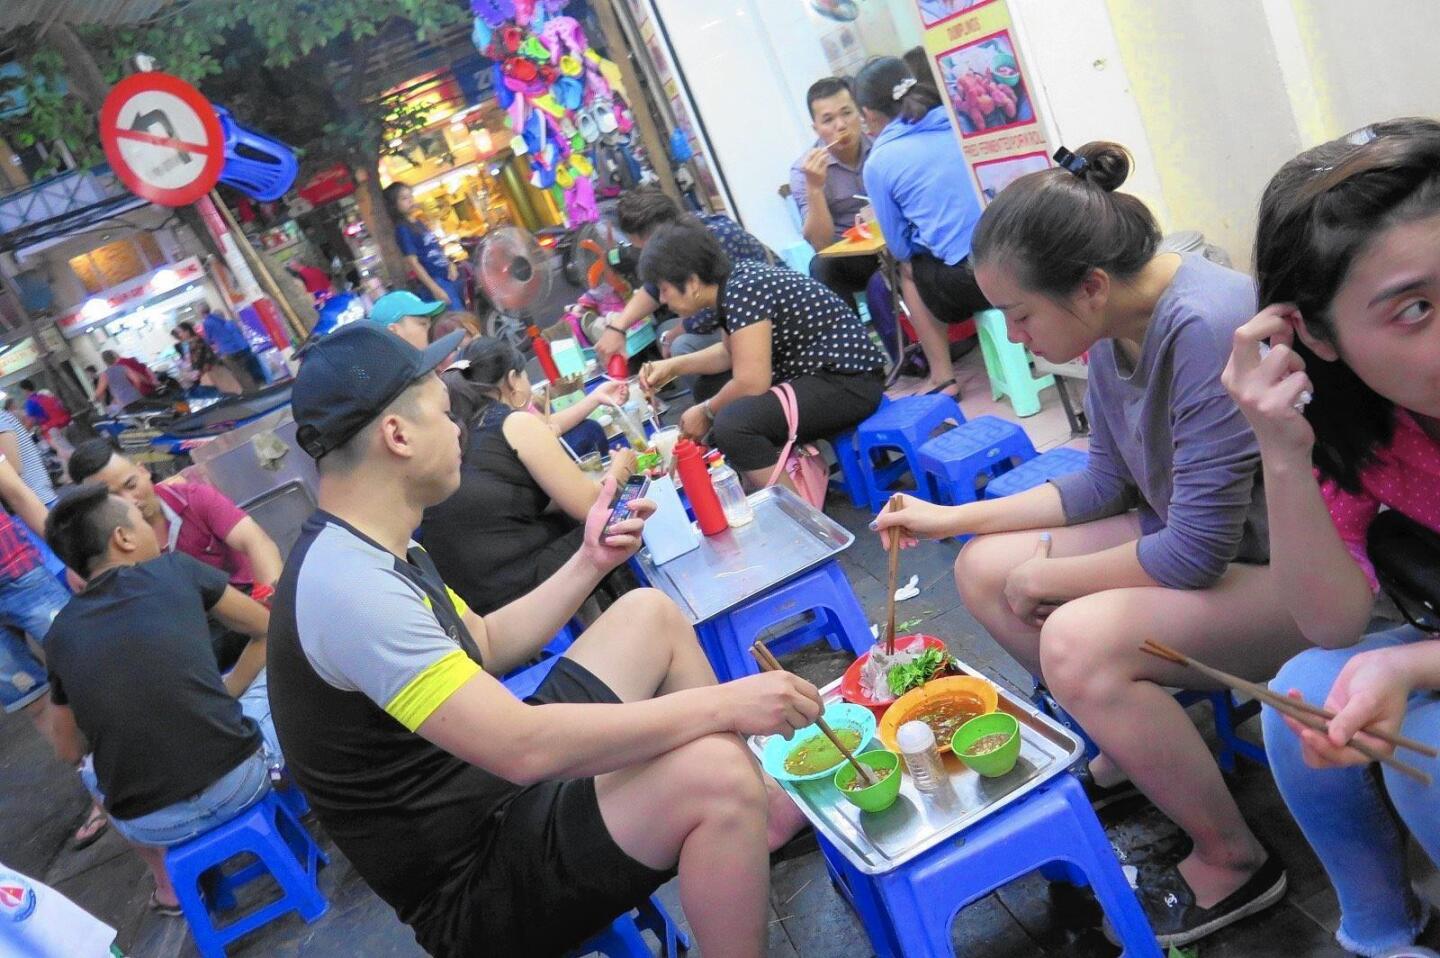 Sidewalk dining on small blue chairs is a hallmark of life in Hanoi.